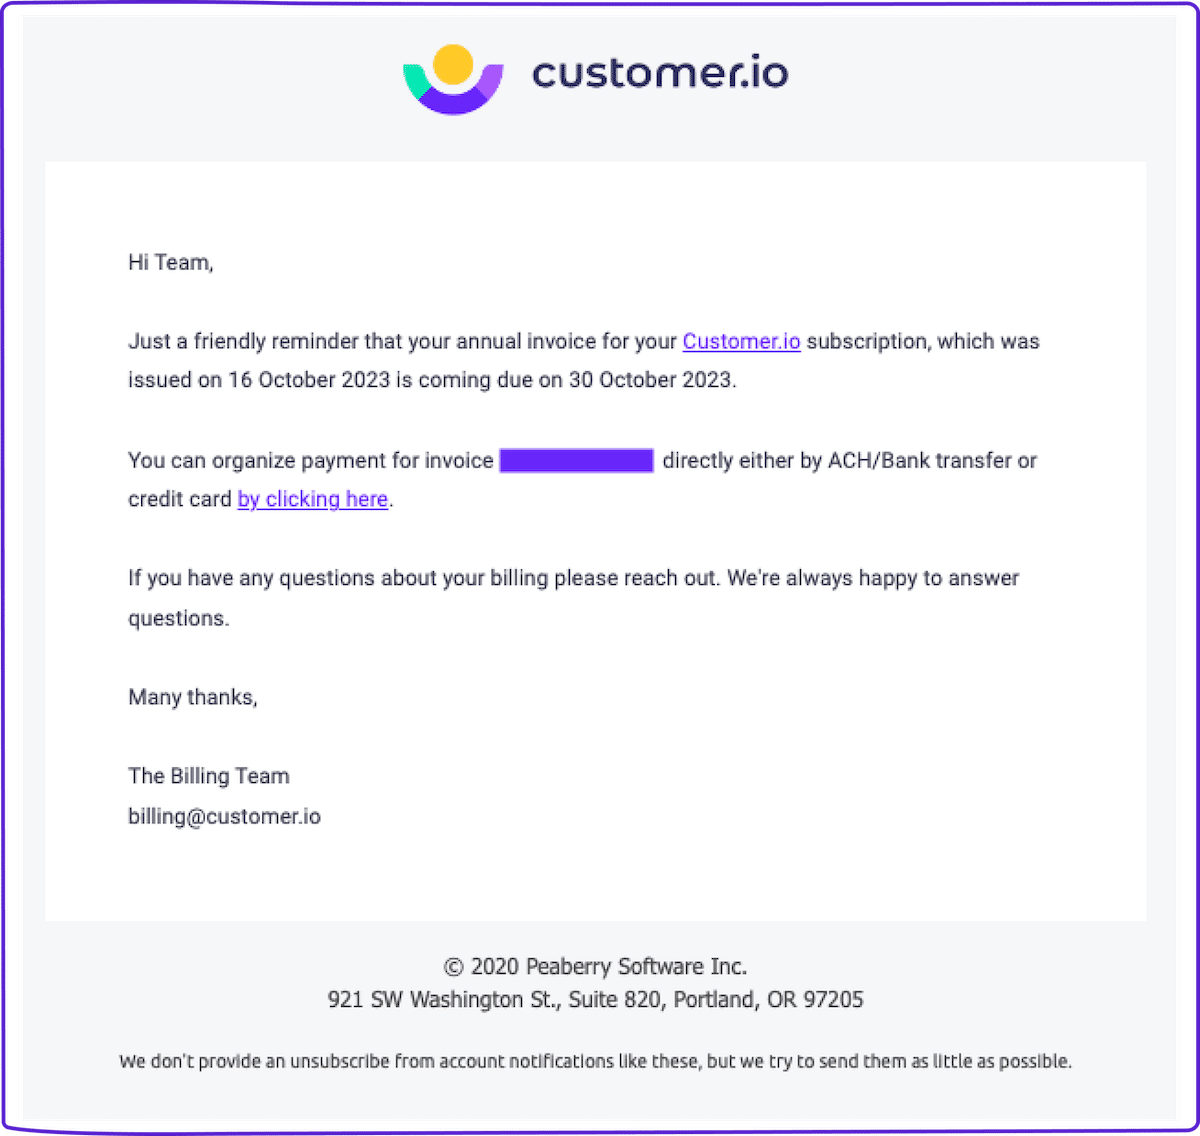 Dunning email template: Invoice due date approaching email from Customer.io